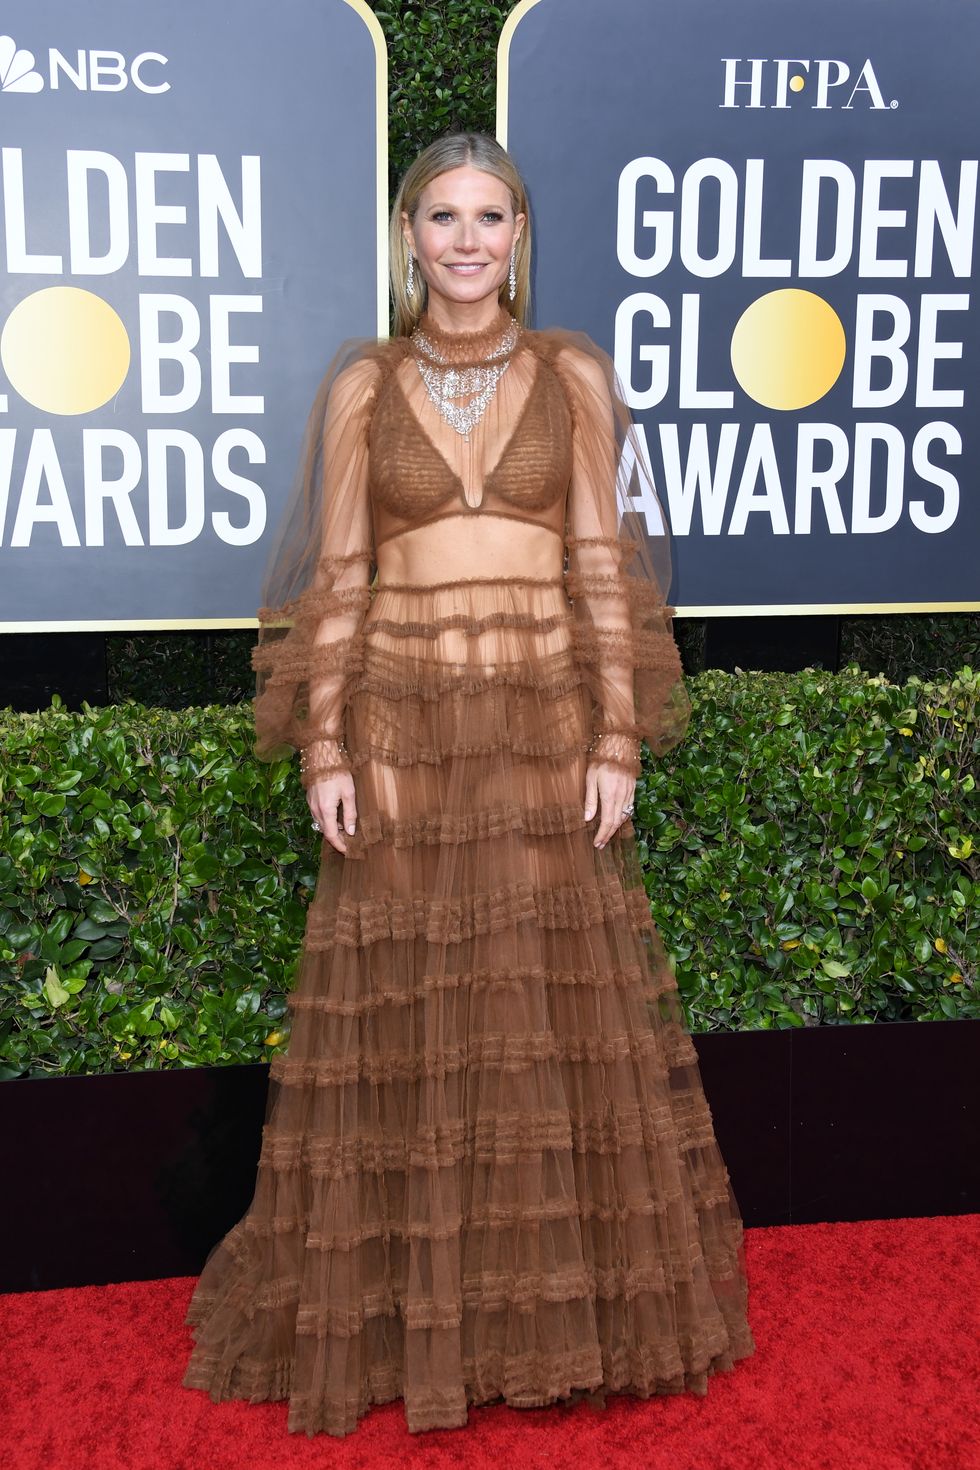 Gwyneth Paltrow attends the 77th Annual Golden Globe Awards at The Beverly Hilton Hotel on January 05, 2020